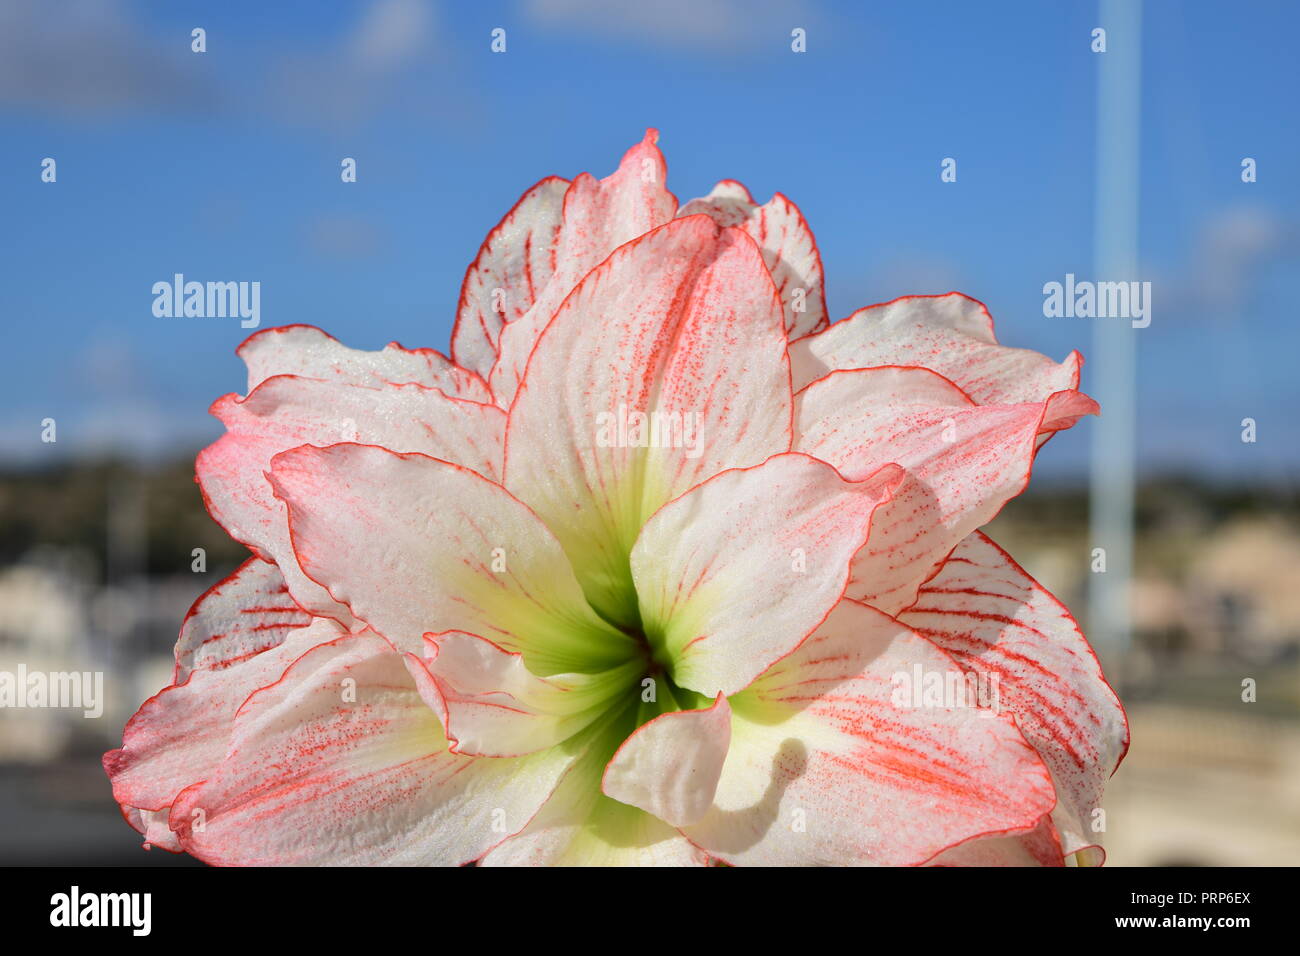 Amaryllis Aphrodite in full bloom, blooming flower, double flowering white with blood red margins and blush pink petal tips. Grown in roof garden pot Stock Photo